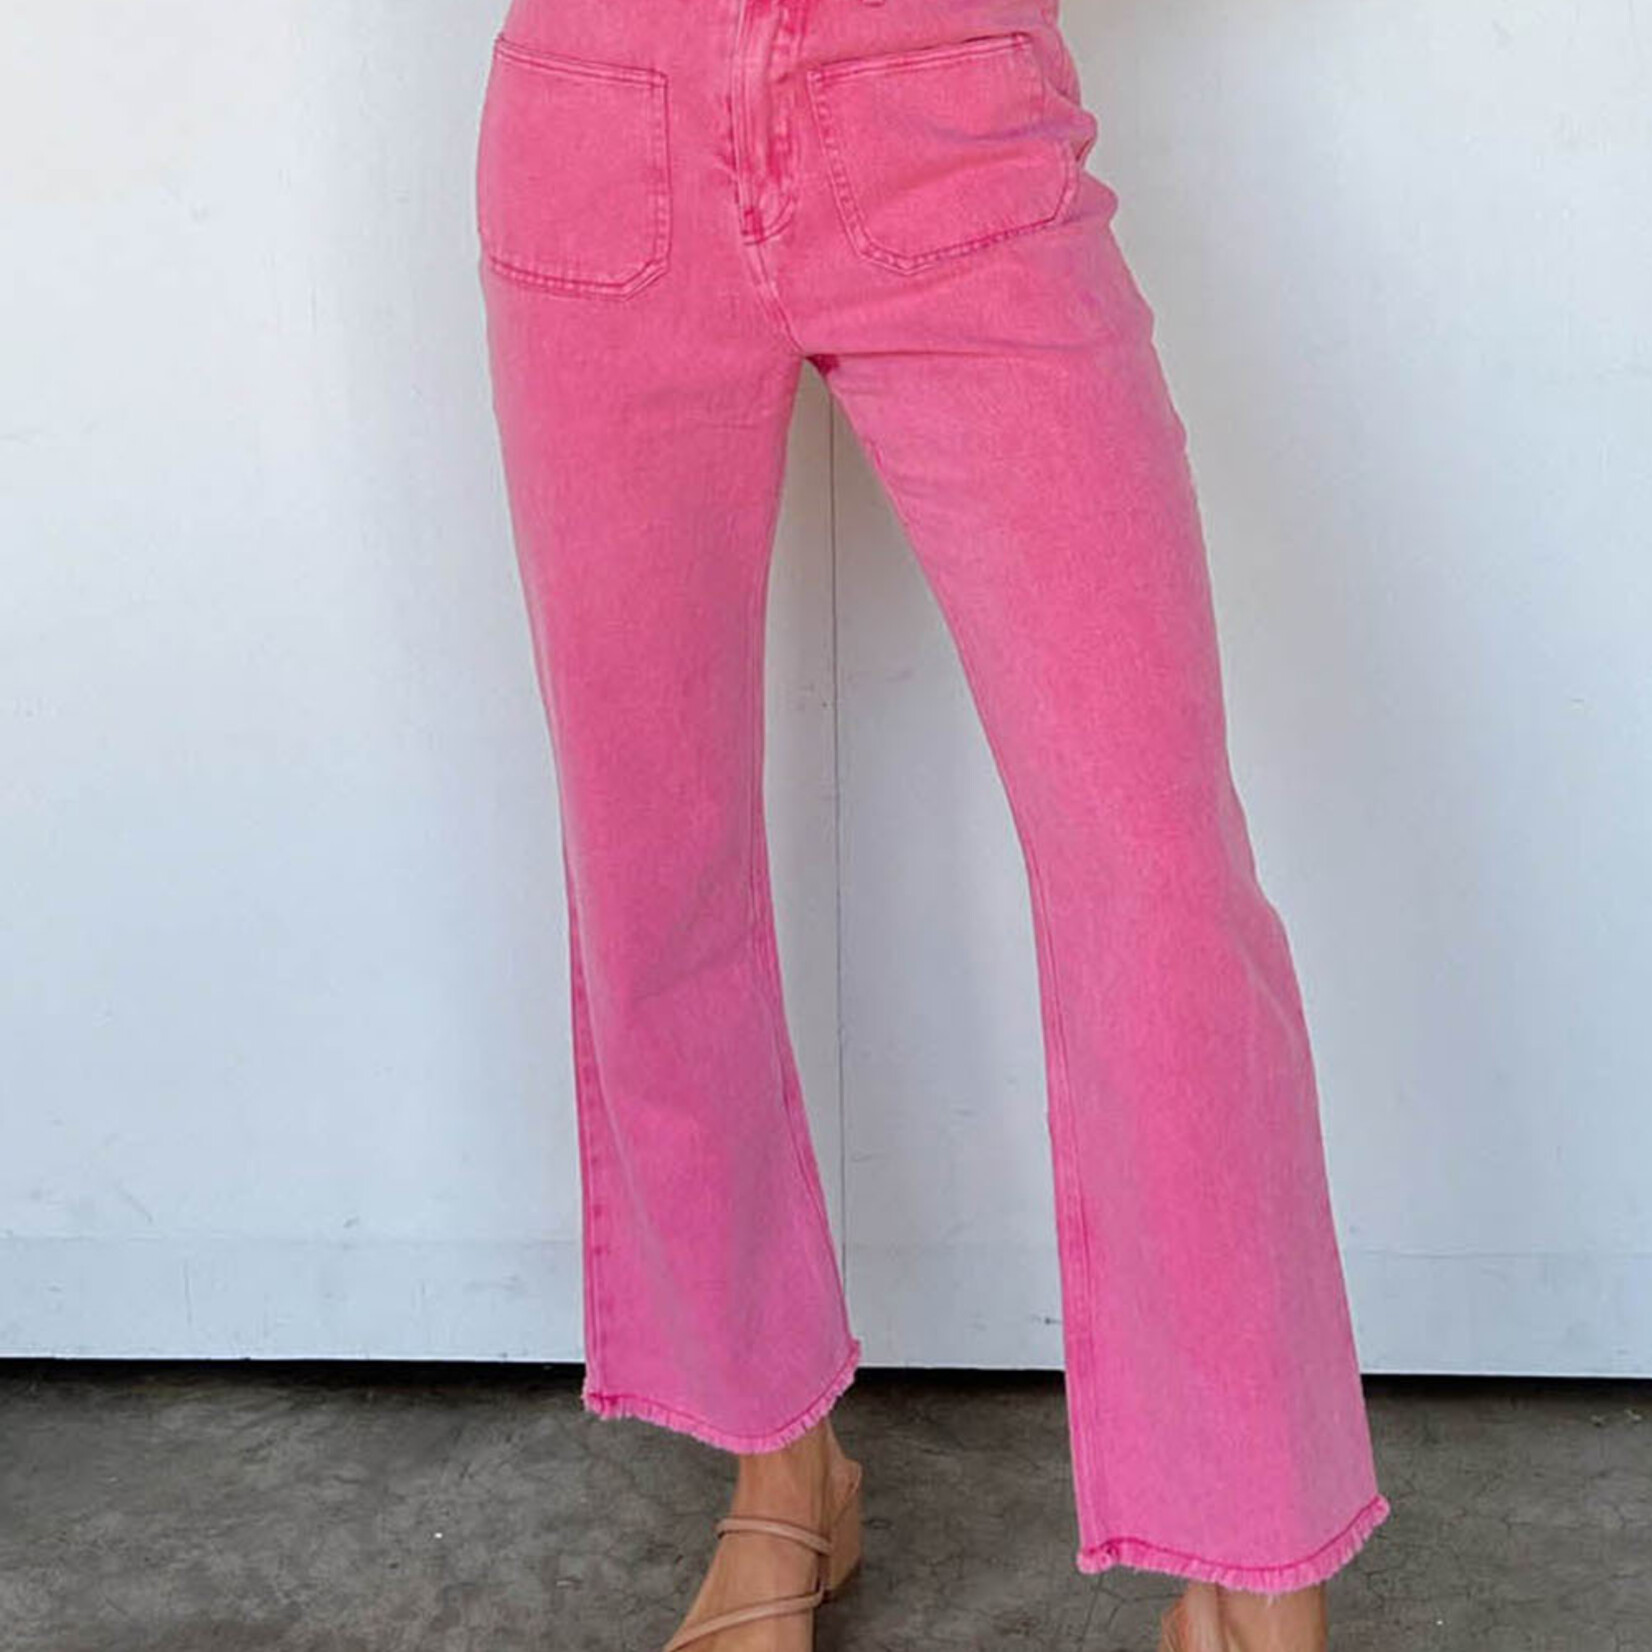 Distressed Pink Flare Leg Jeans - Texas Vintage Antiques